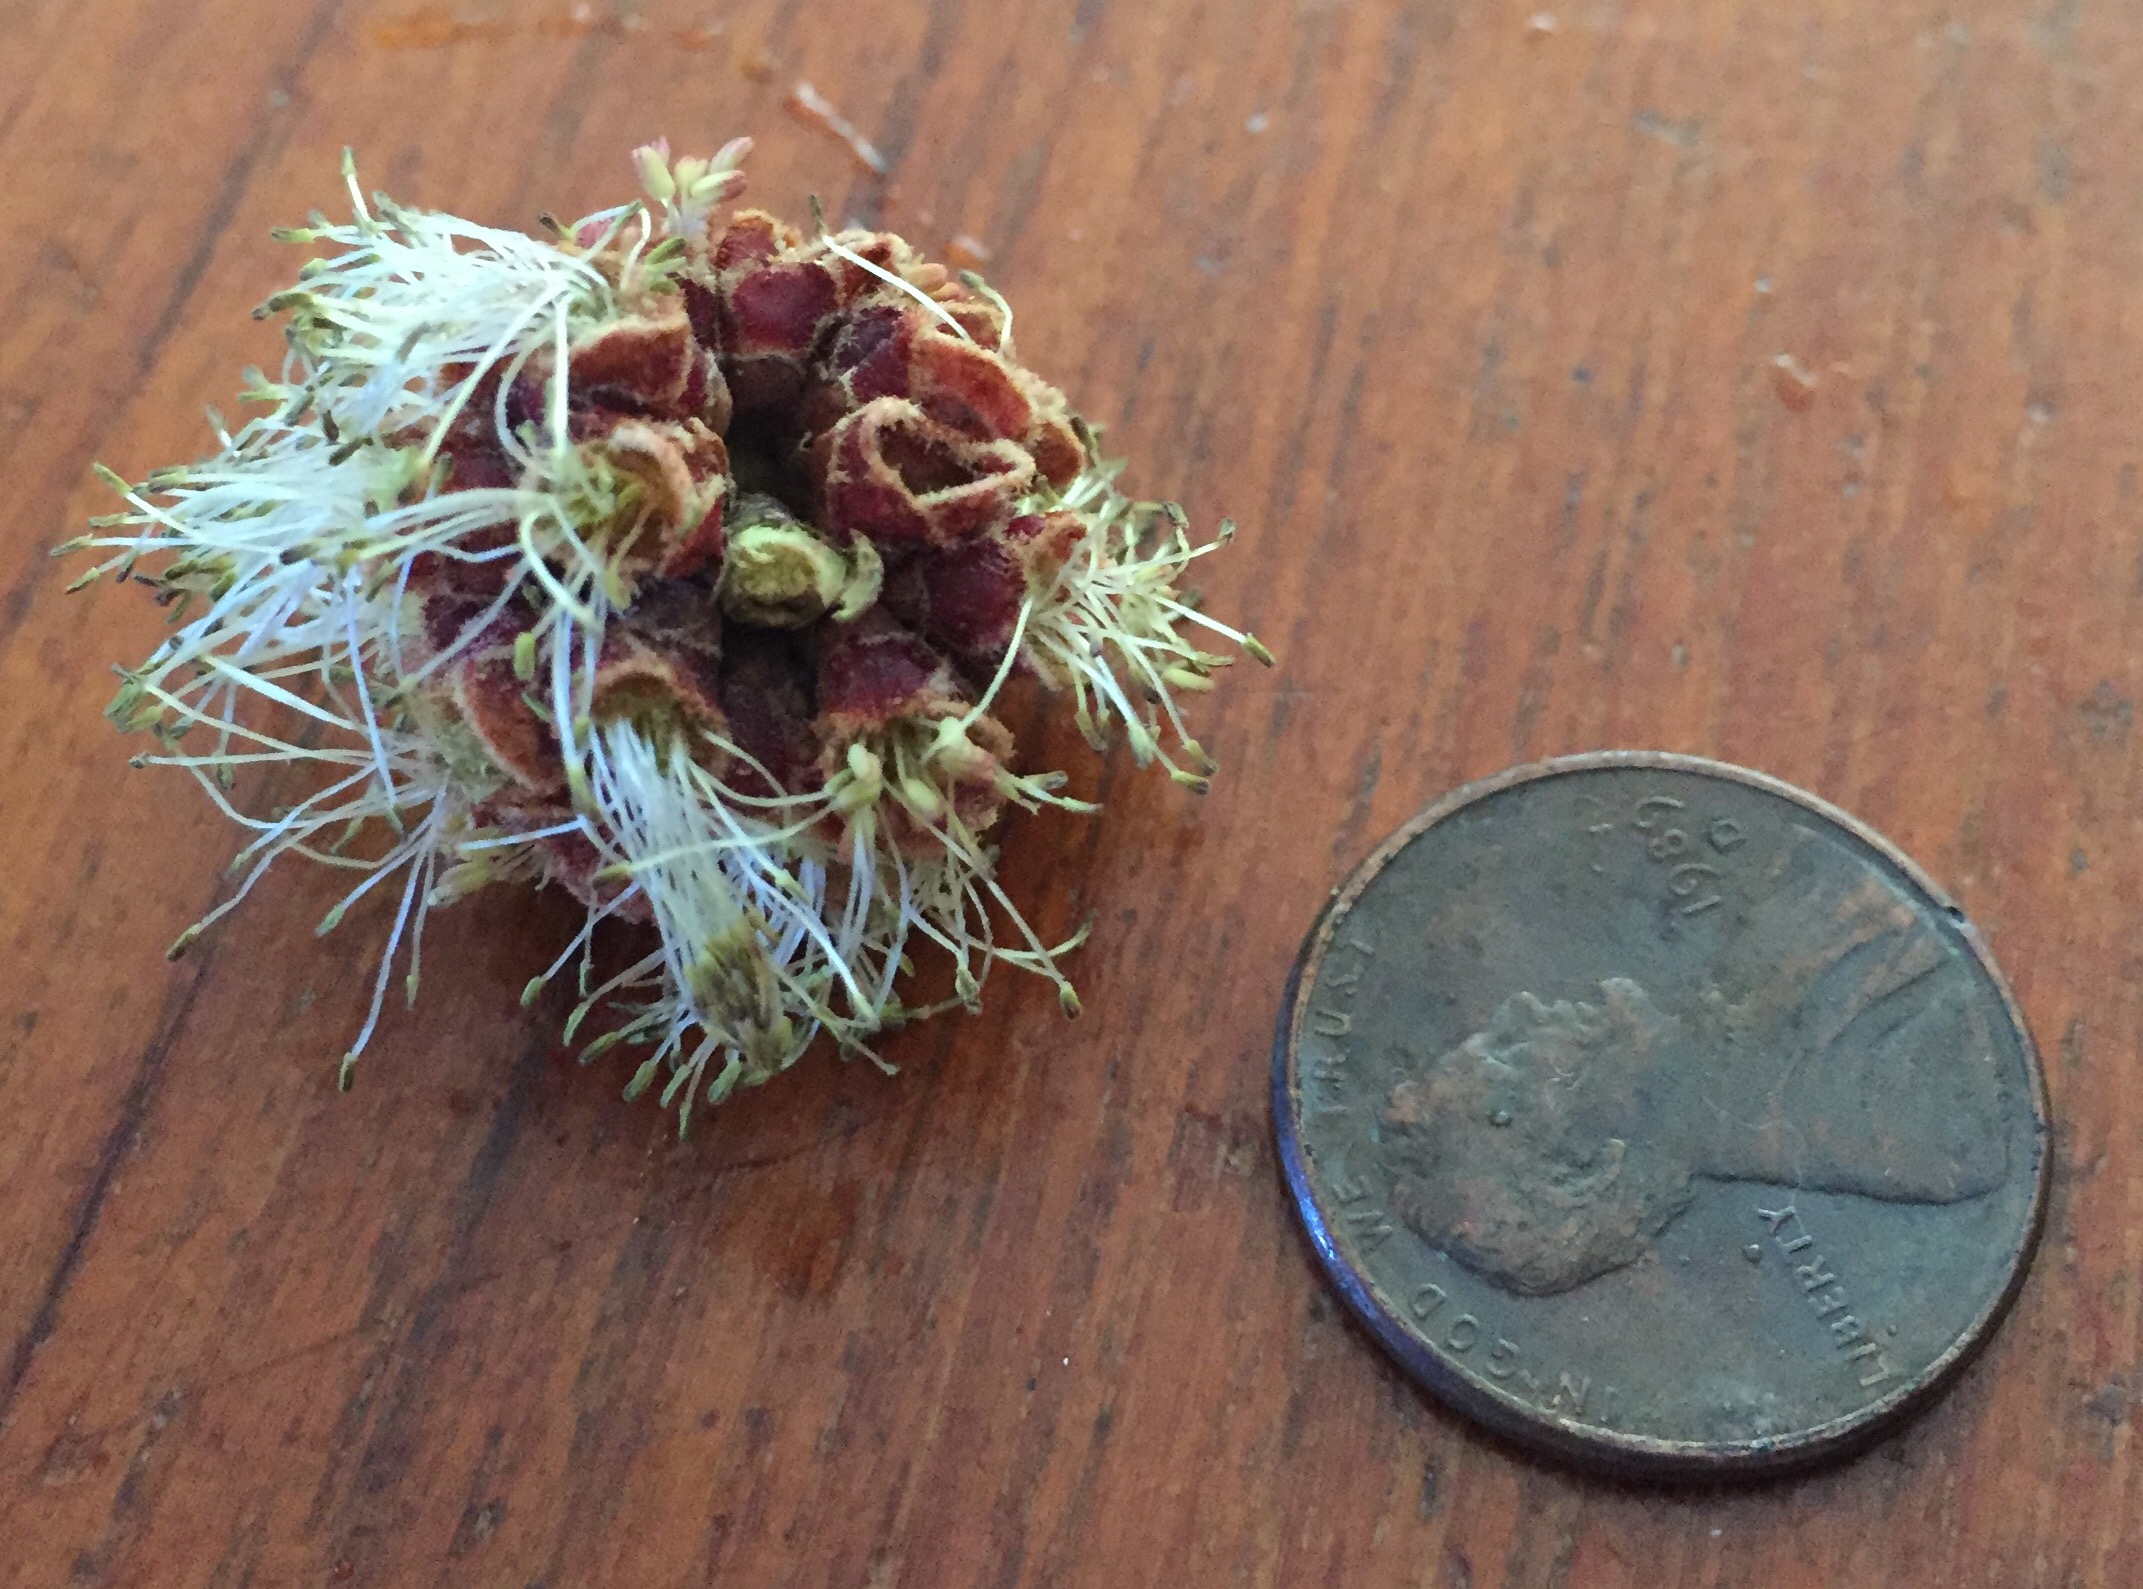 Silver maple tree flower nipped off the twig by a squirrel.